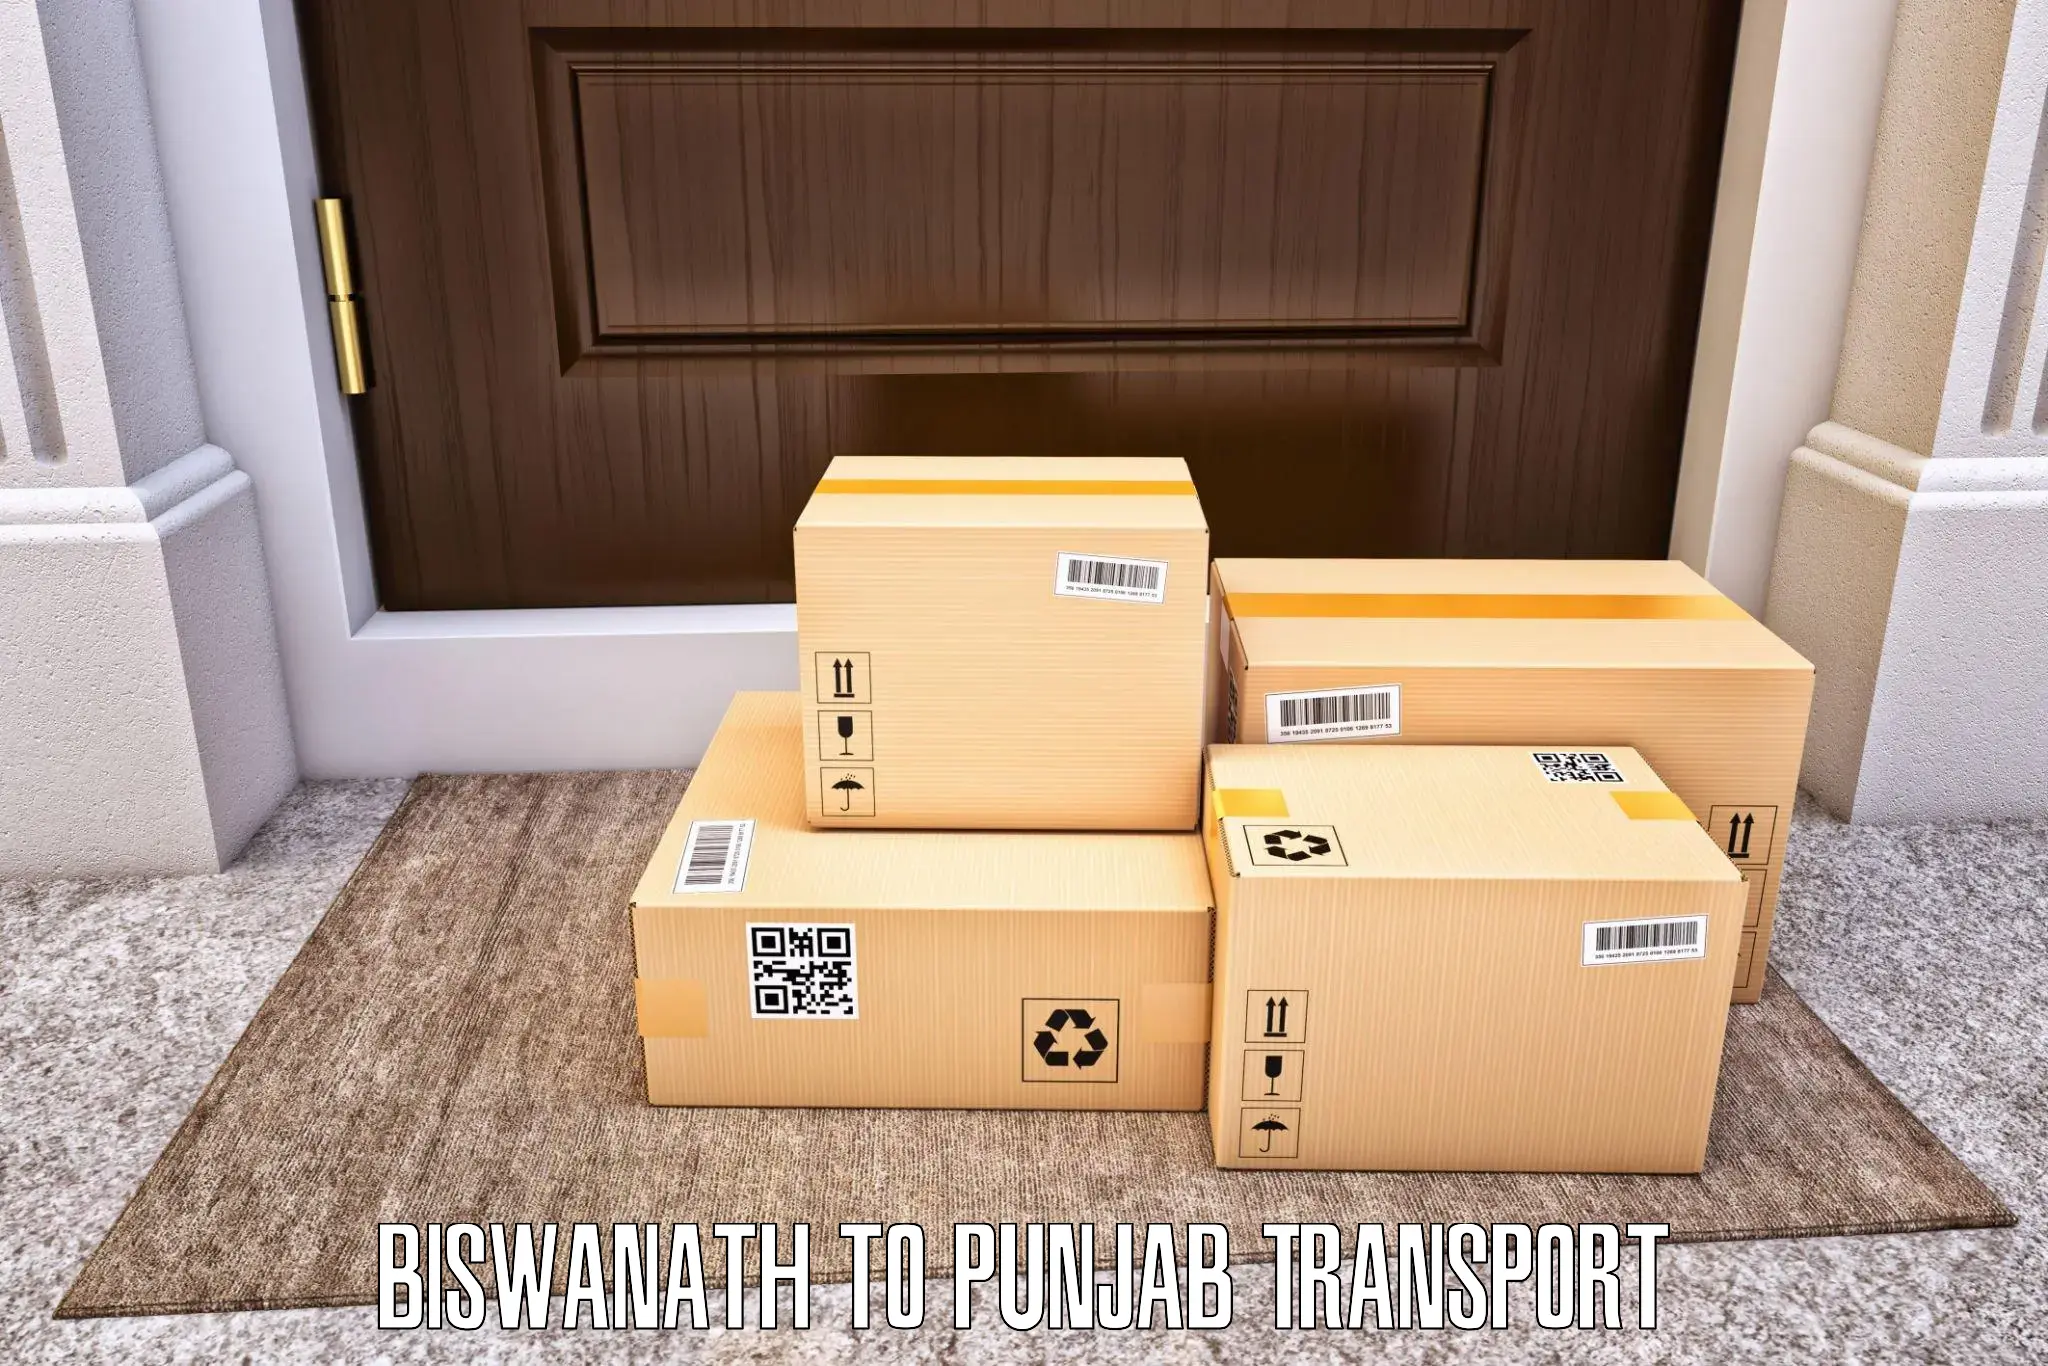 Sending bike to another city Biswanath to Patiala